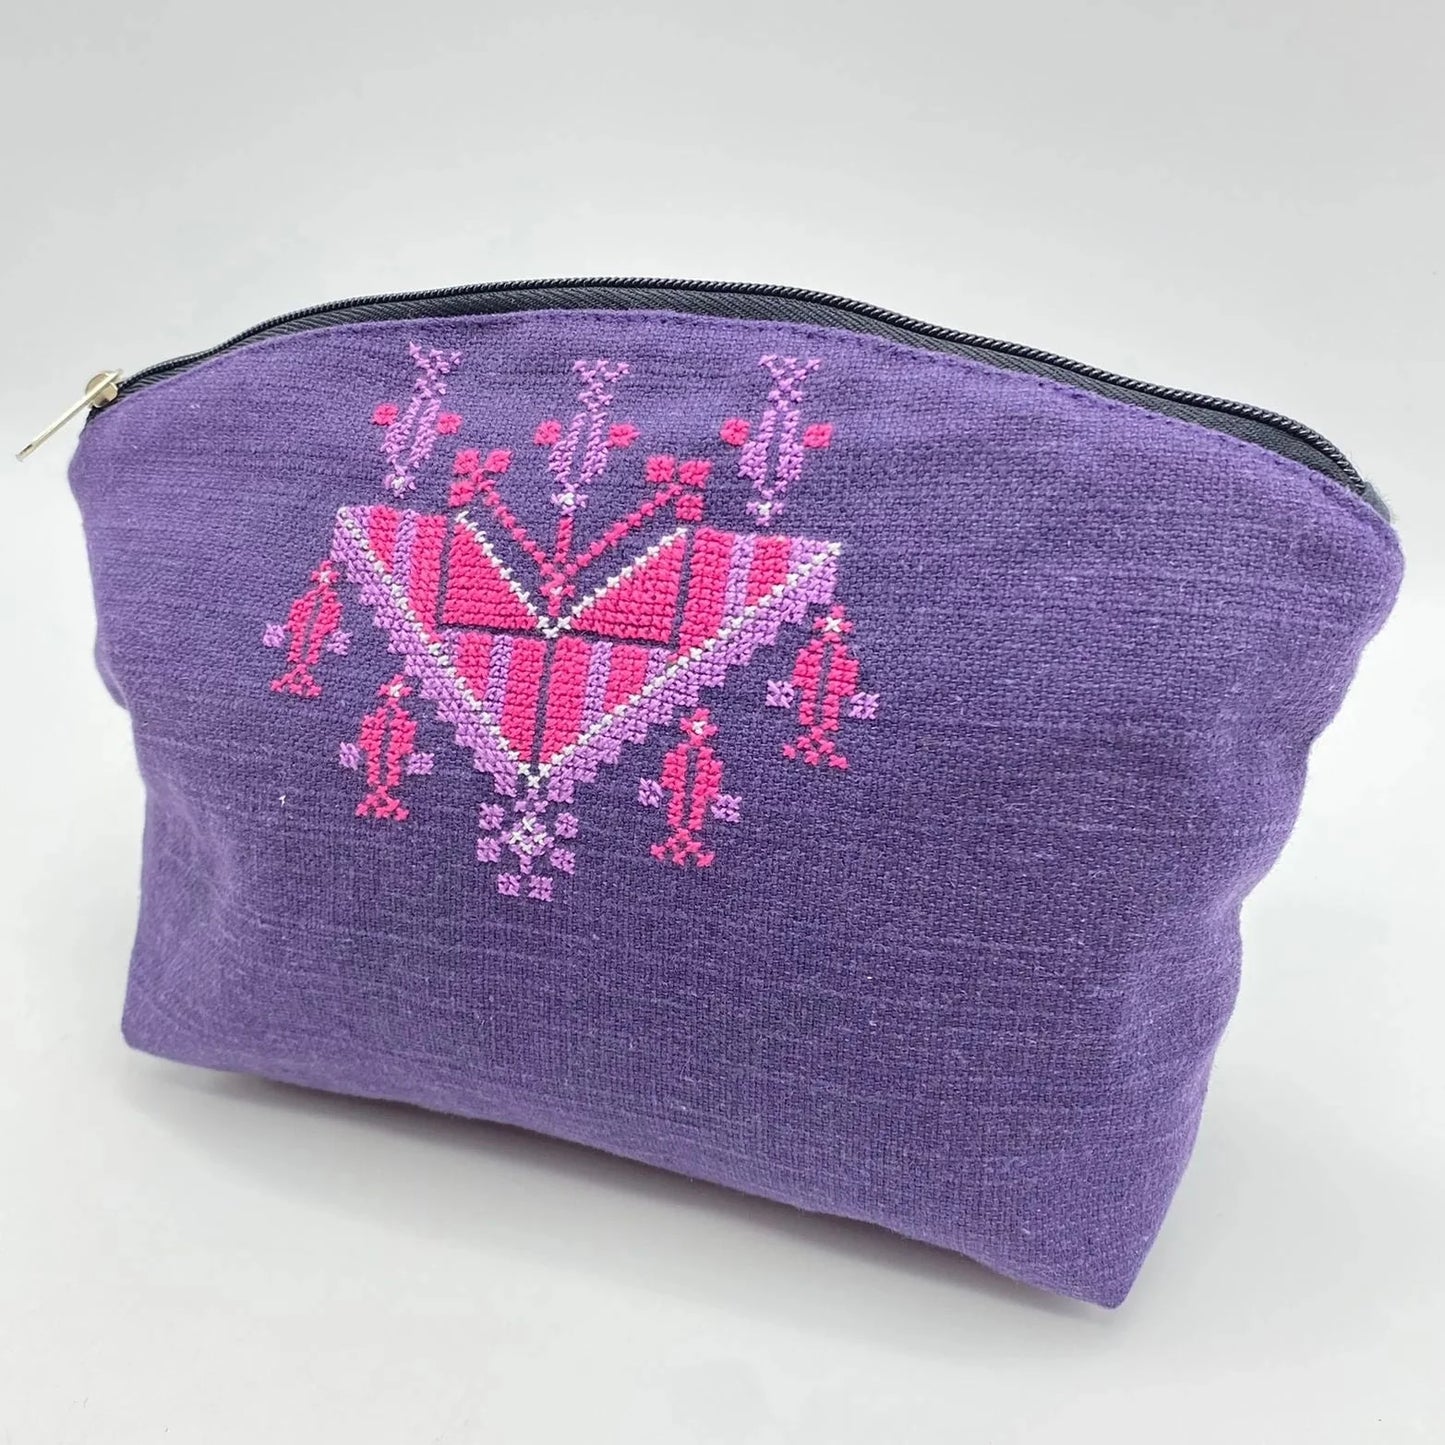 Palestinian Embroidered Pouch